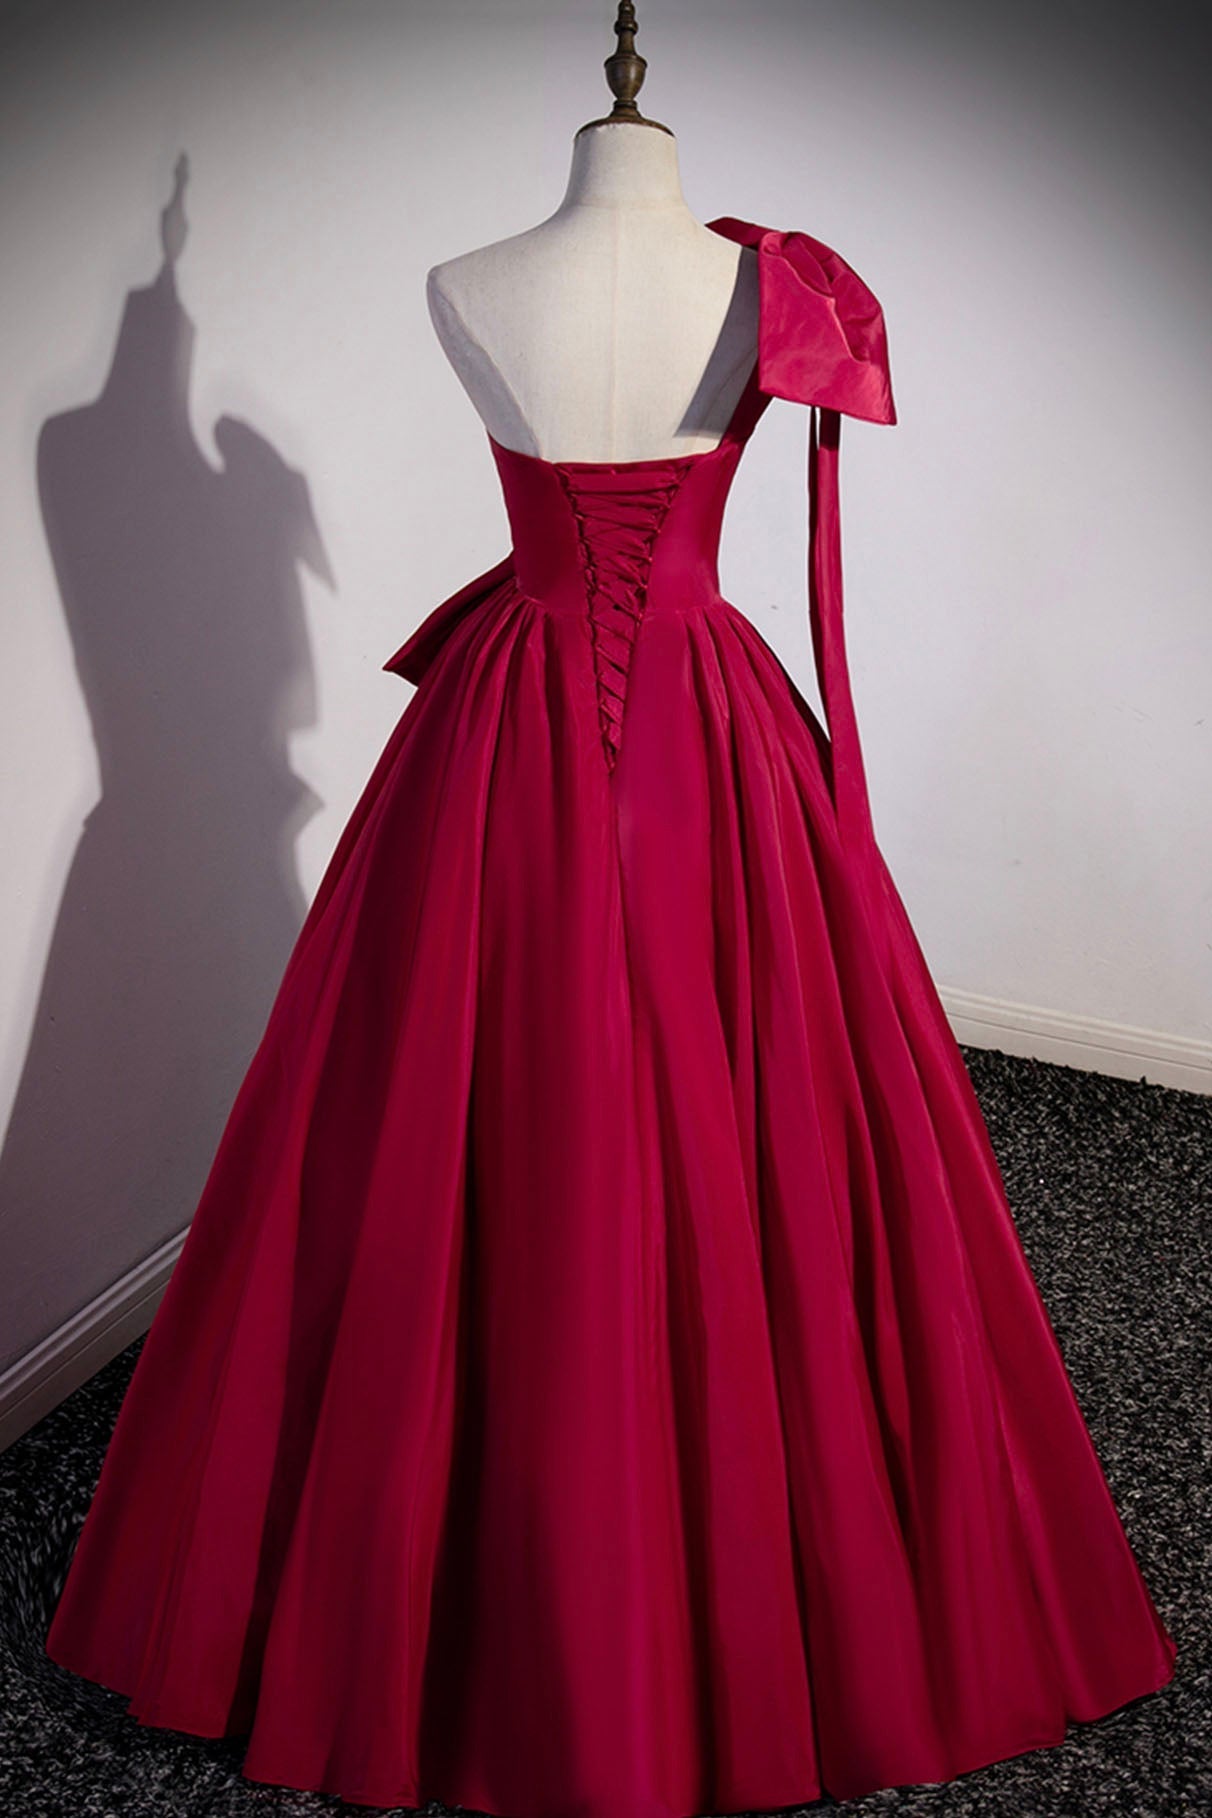 Prom Dress Long, Red One Shoulder Satin Long Prom Dress, A-Line Evening Party Dress